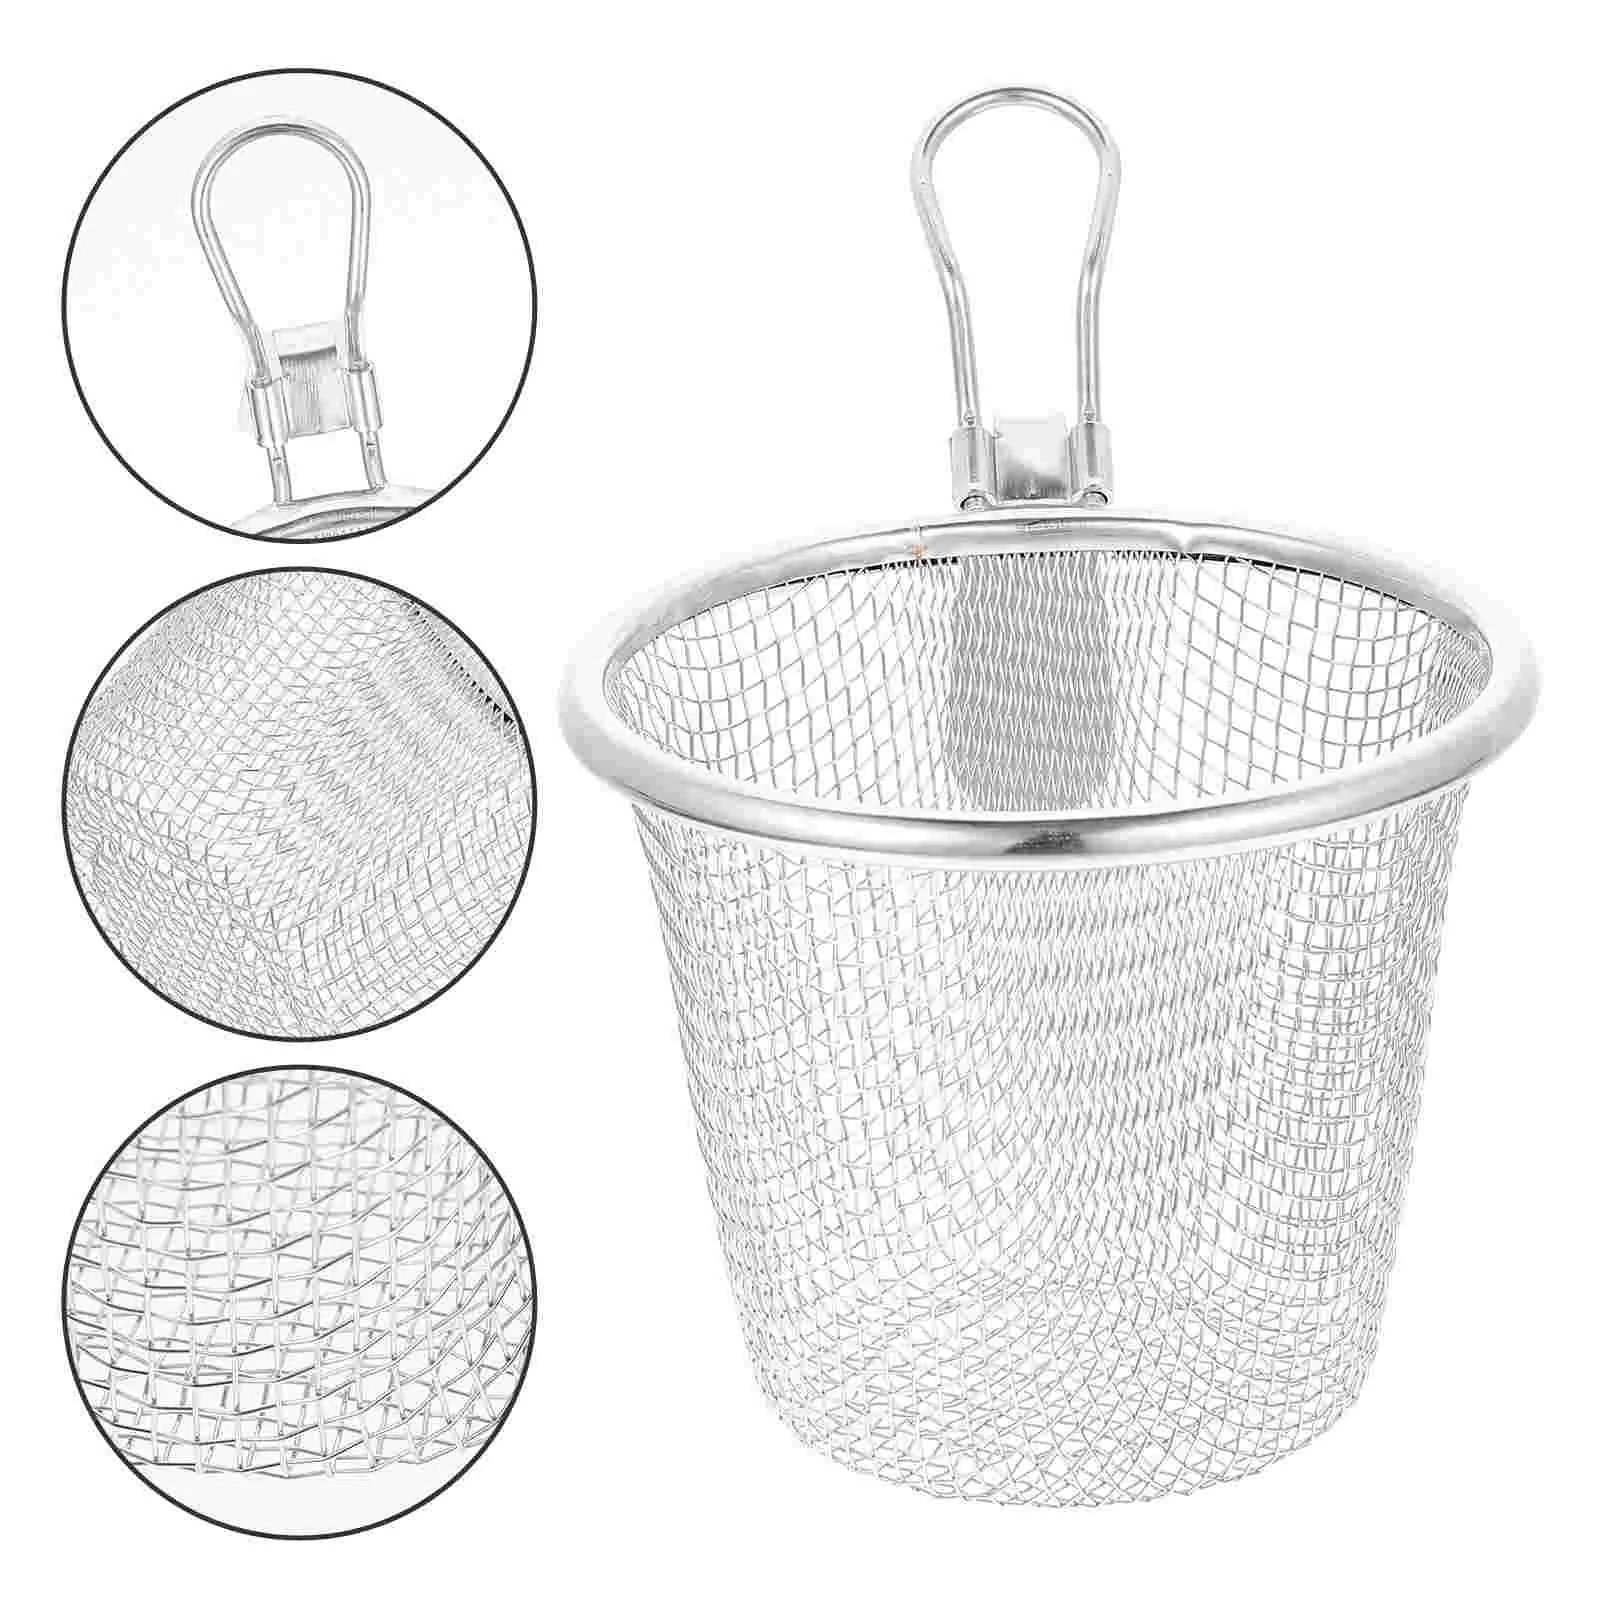 

Stainless Steel Colander Convenient Noodle Strainer Home Accessory Cooking Utensils Mesh Collapsible Supply Tablespoon